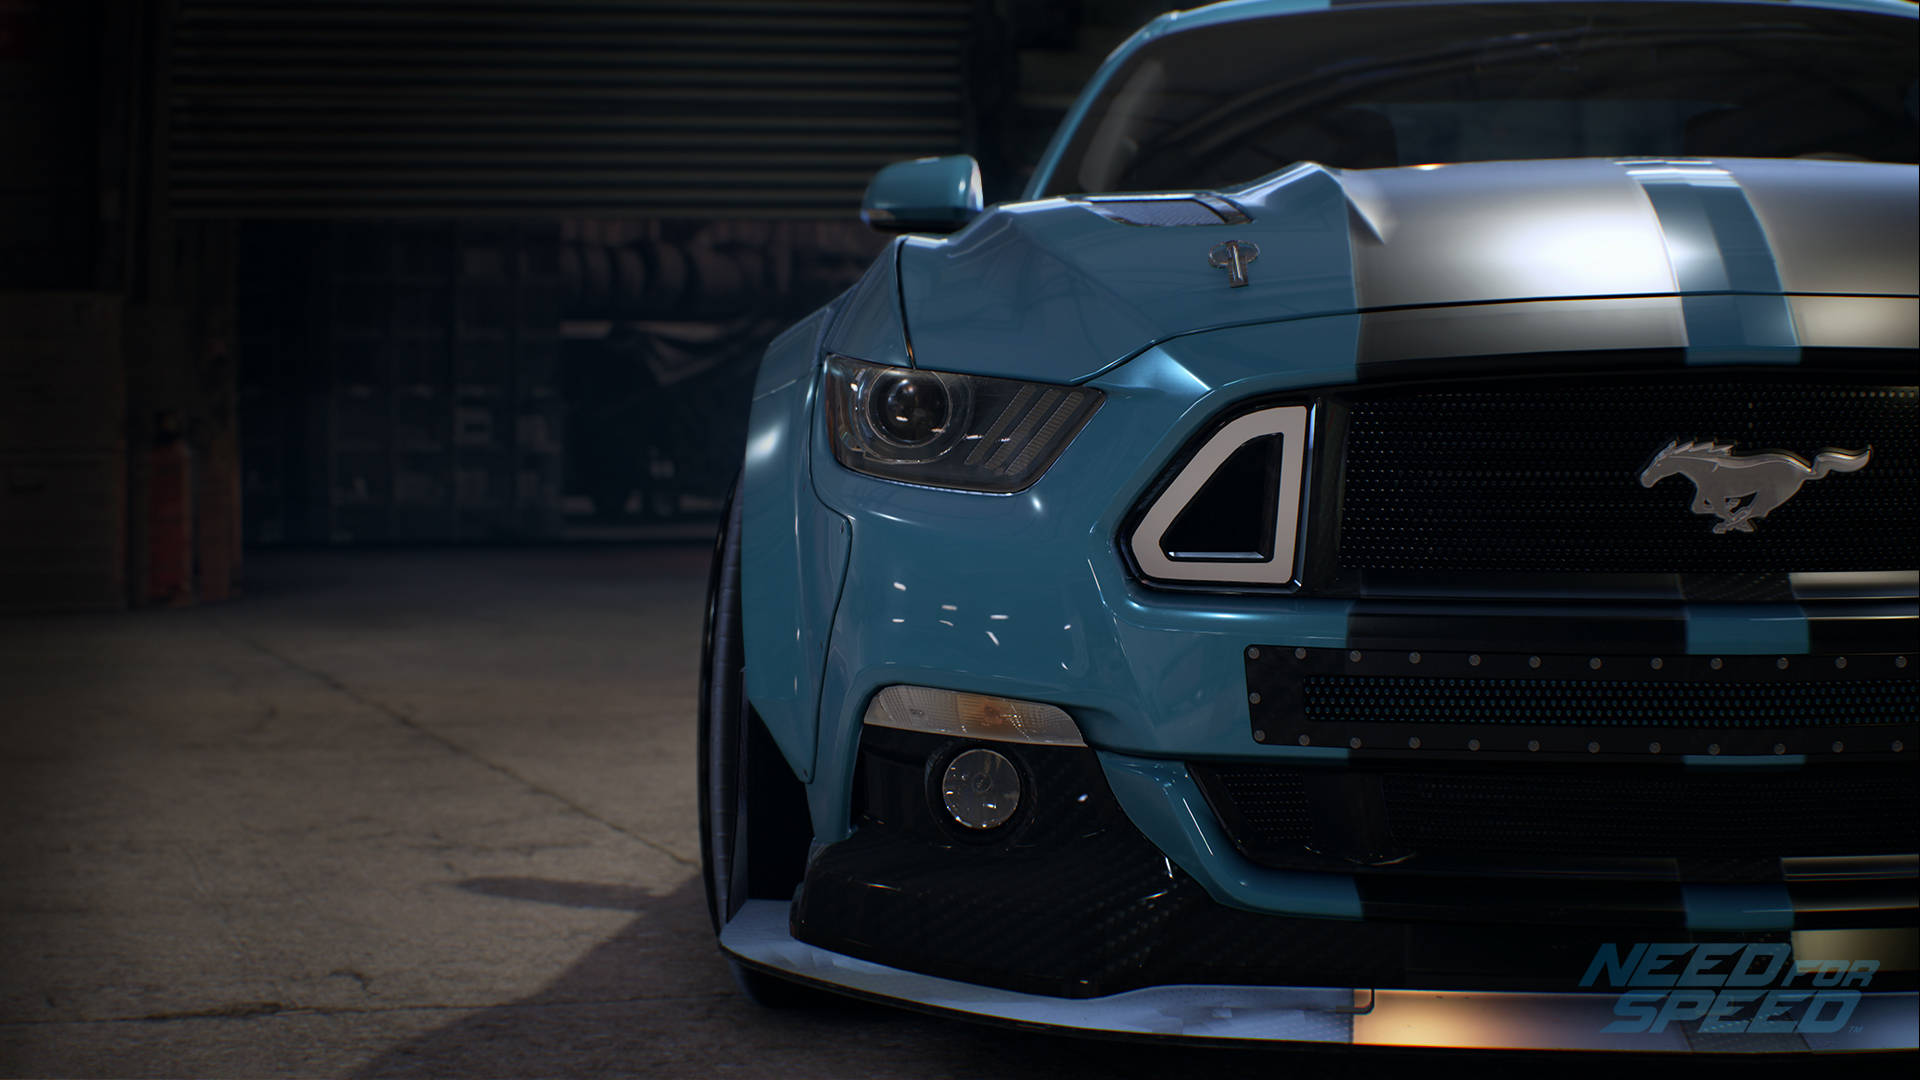 Need For Speed Blue Ford Mustang Gt Wallpaper